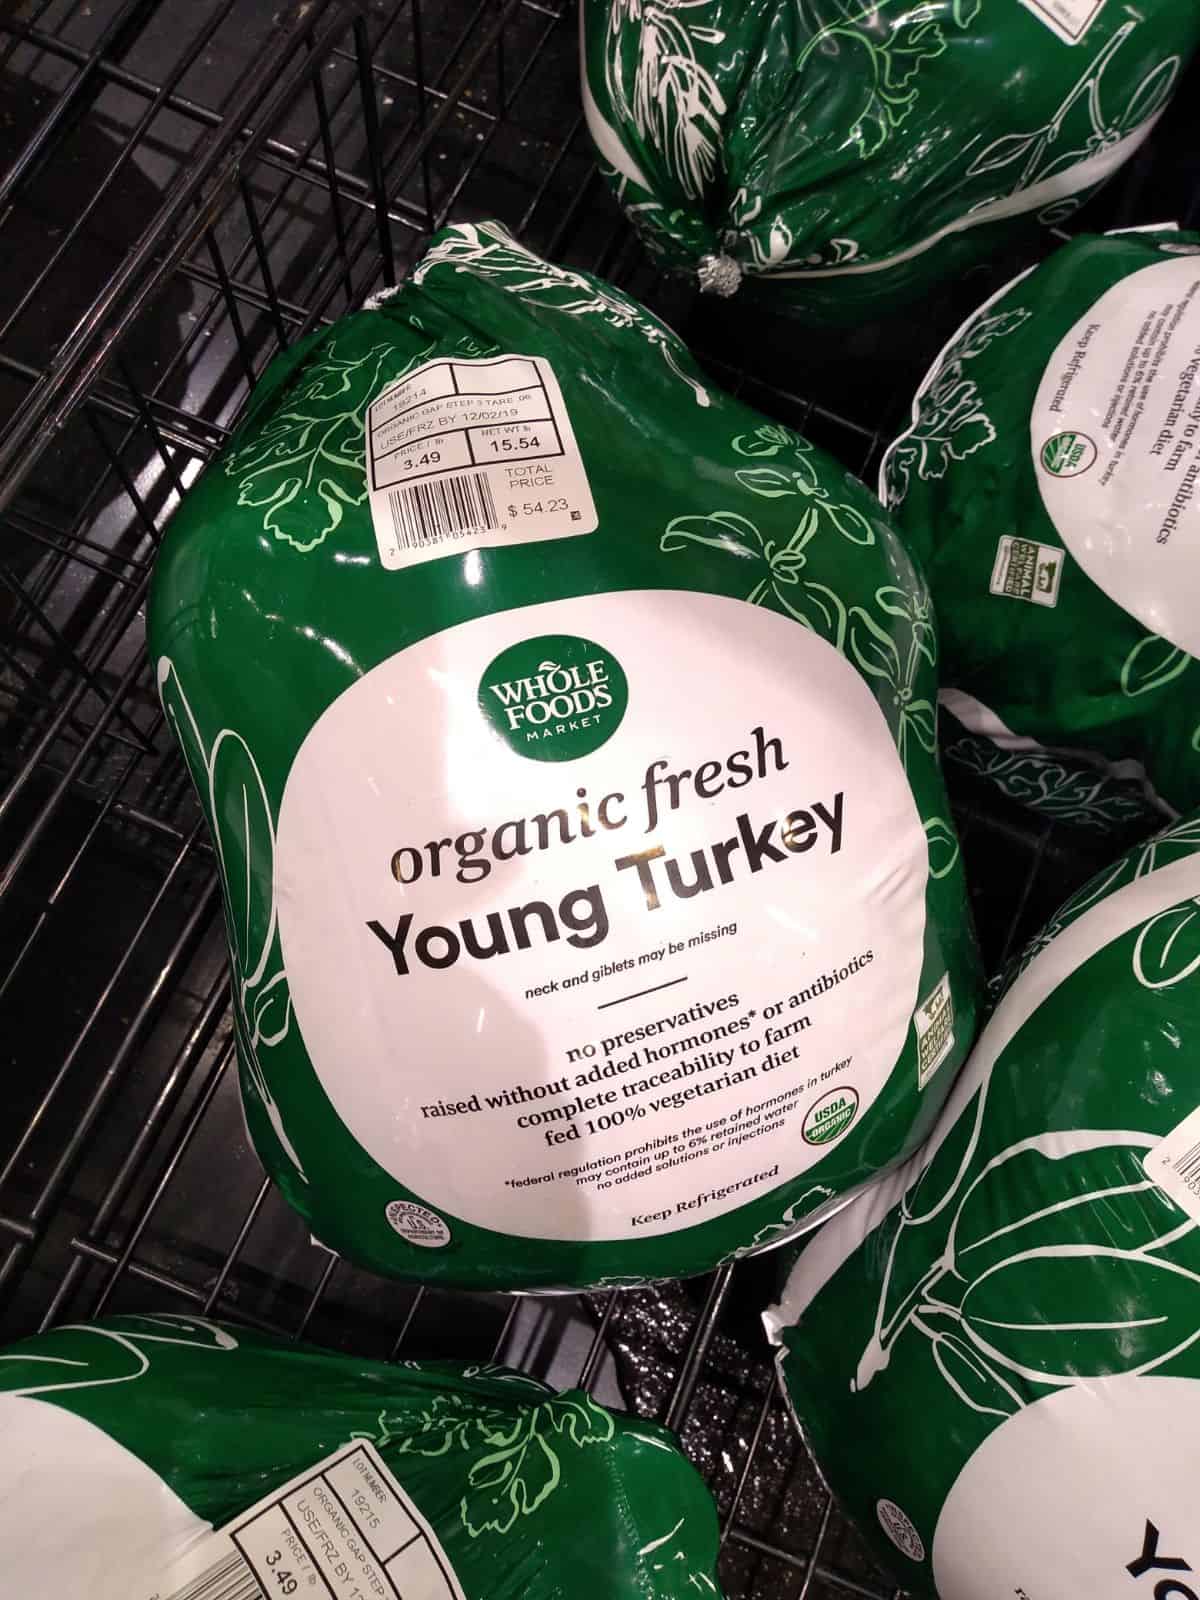 Whole Foods Market Organic Fresh Young Turkey in green and white packaging. 